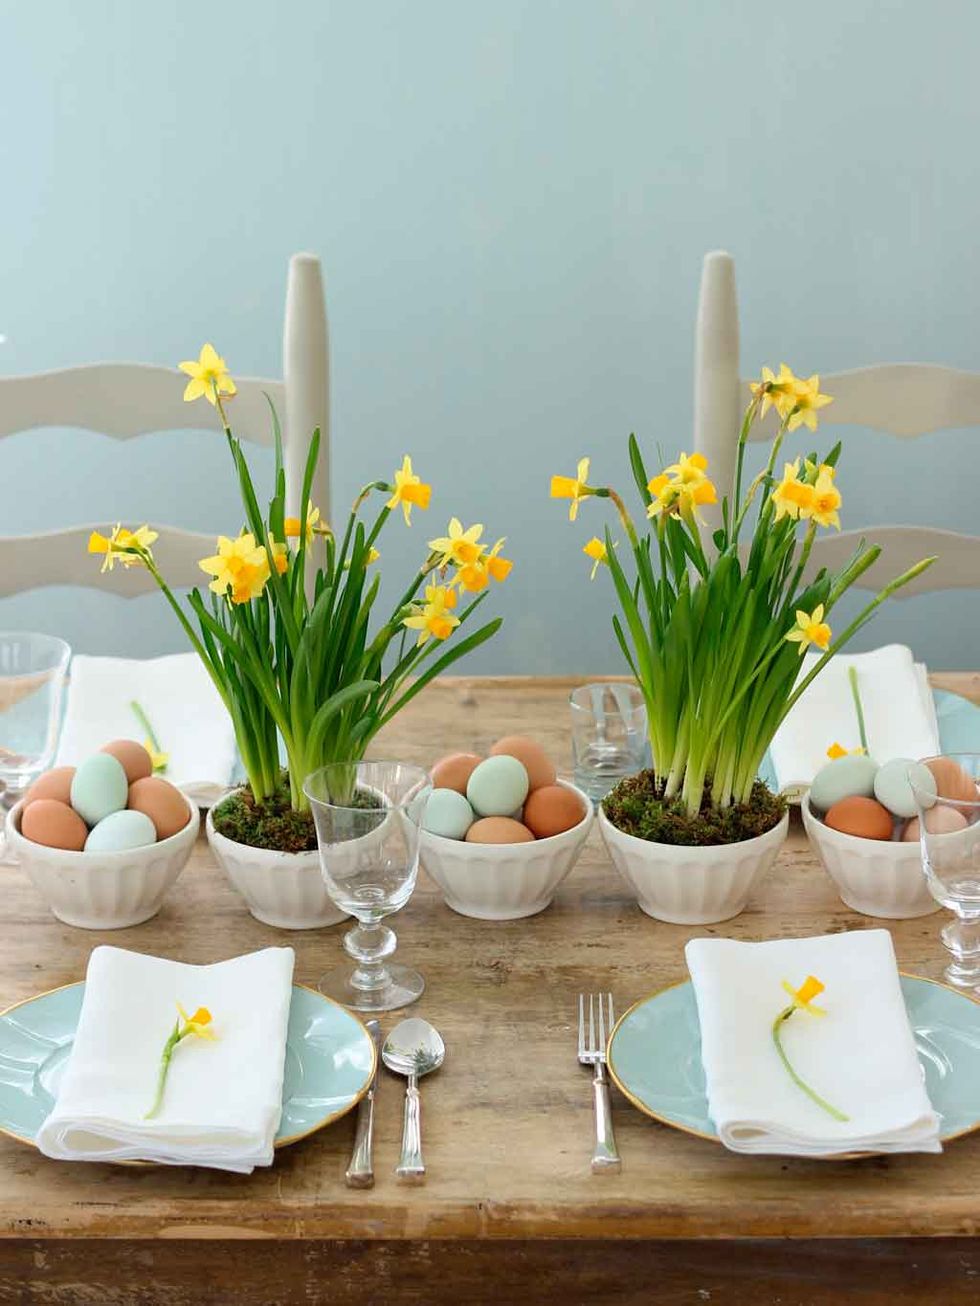 17. Daffodils and Easter Eggs